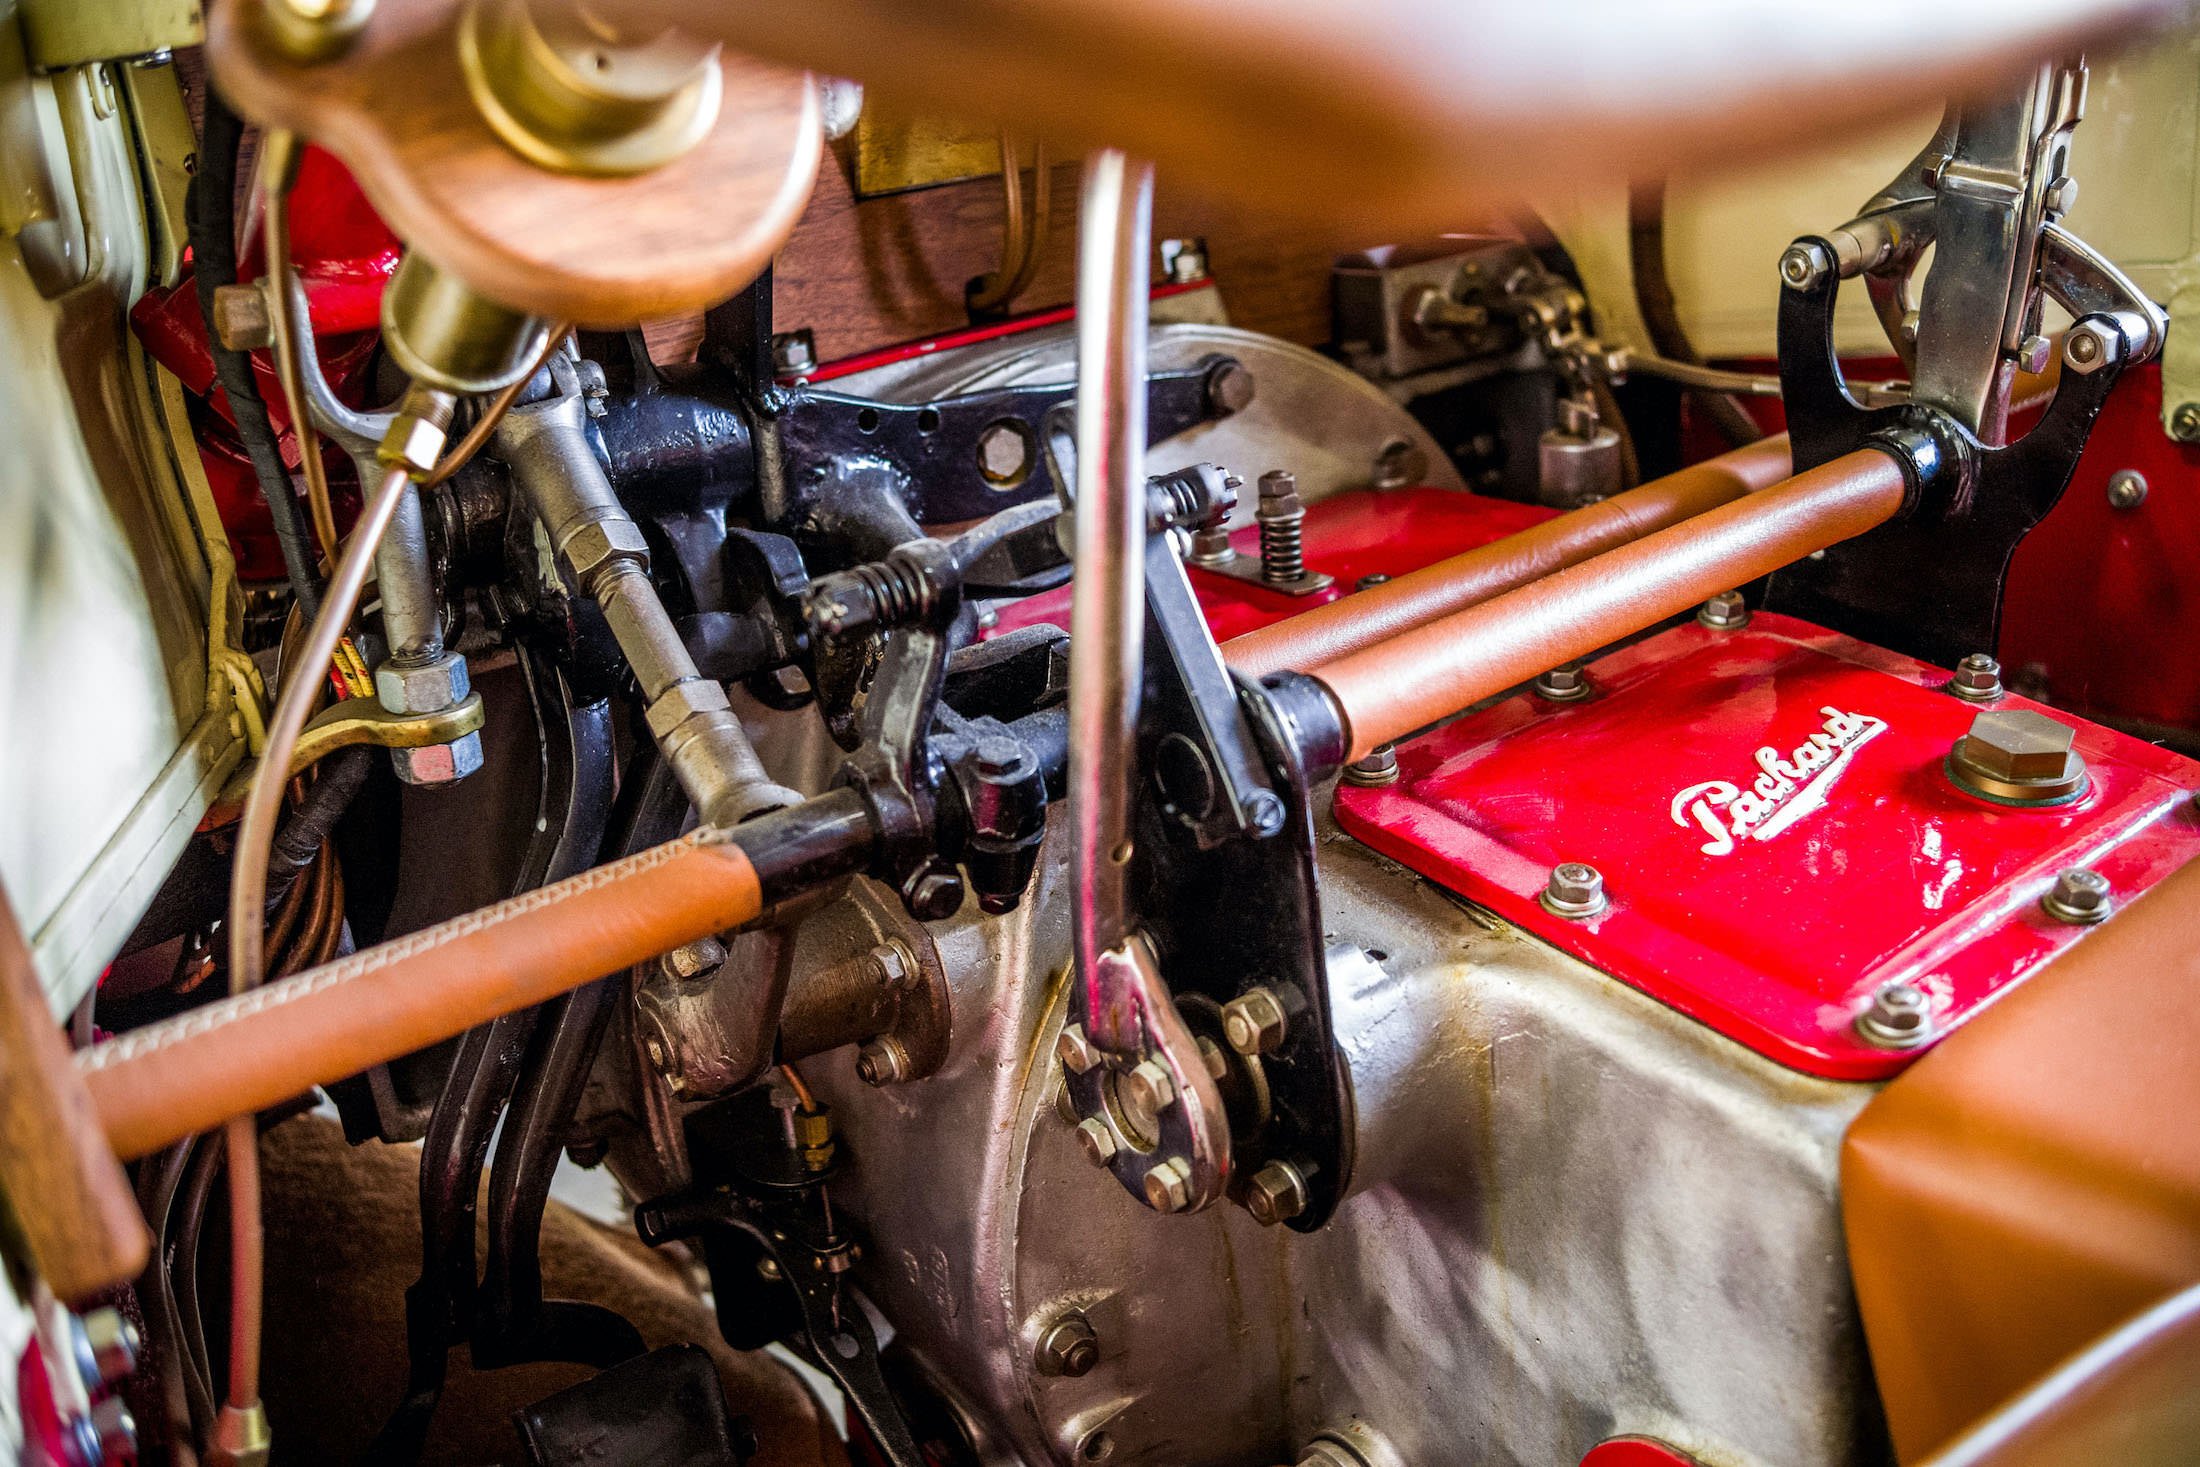 For Sale: Packard Twin Six 7.0 Litre V12 – A 104 Year Old Open